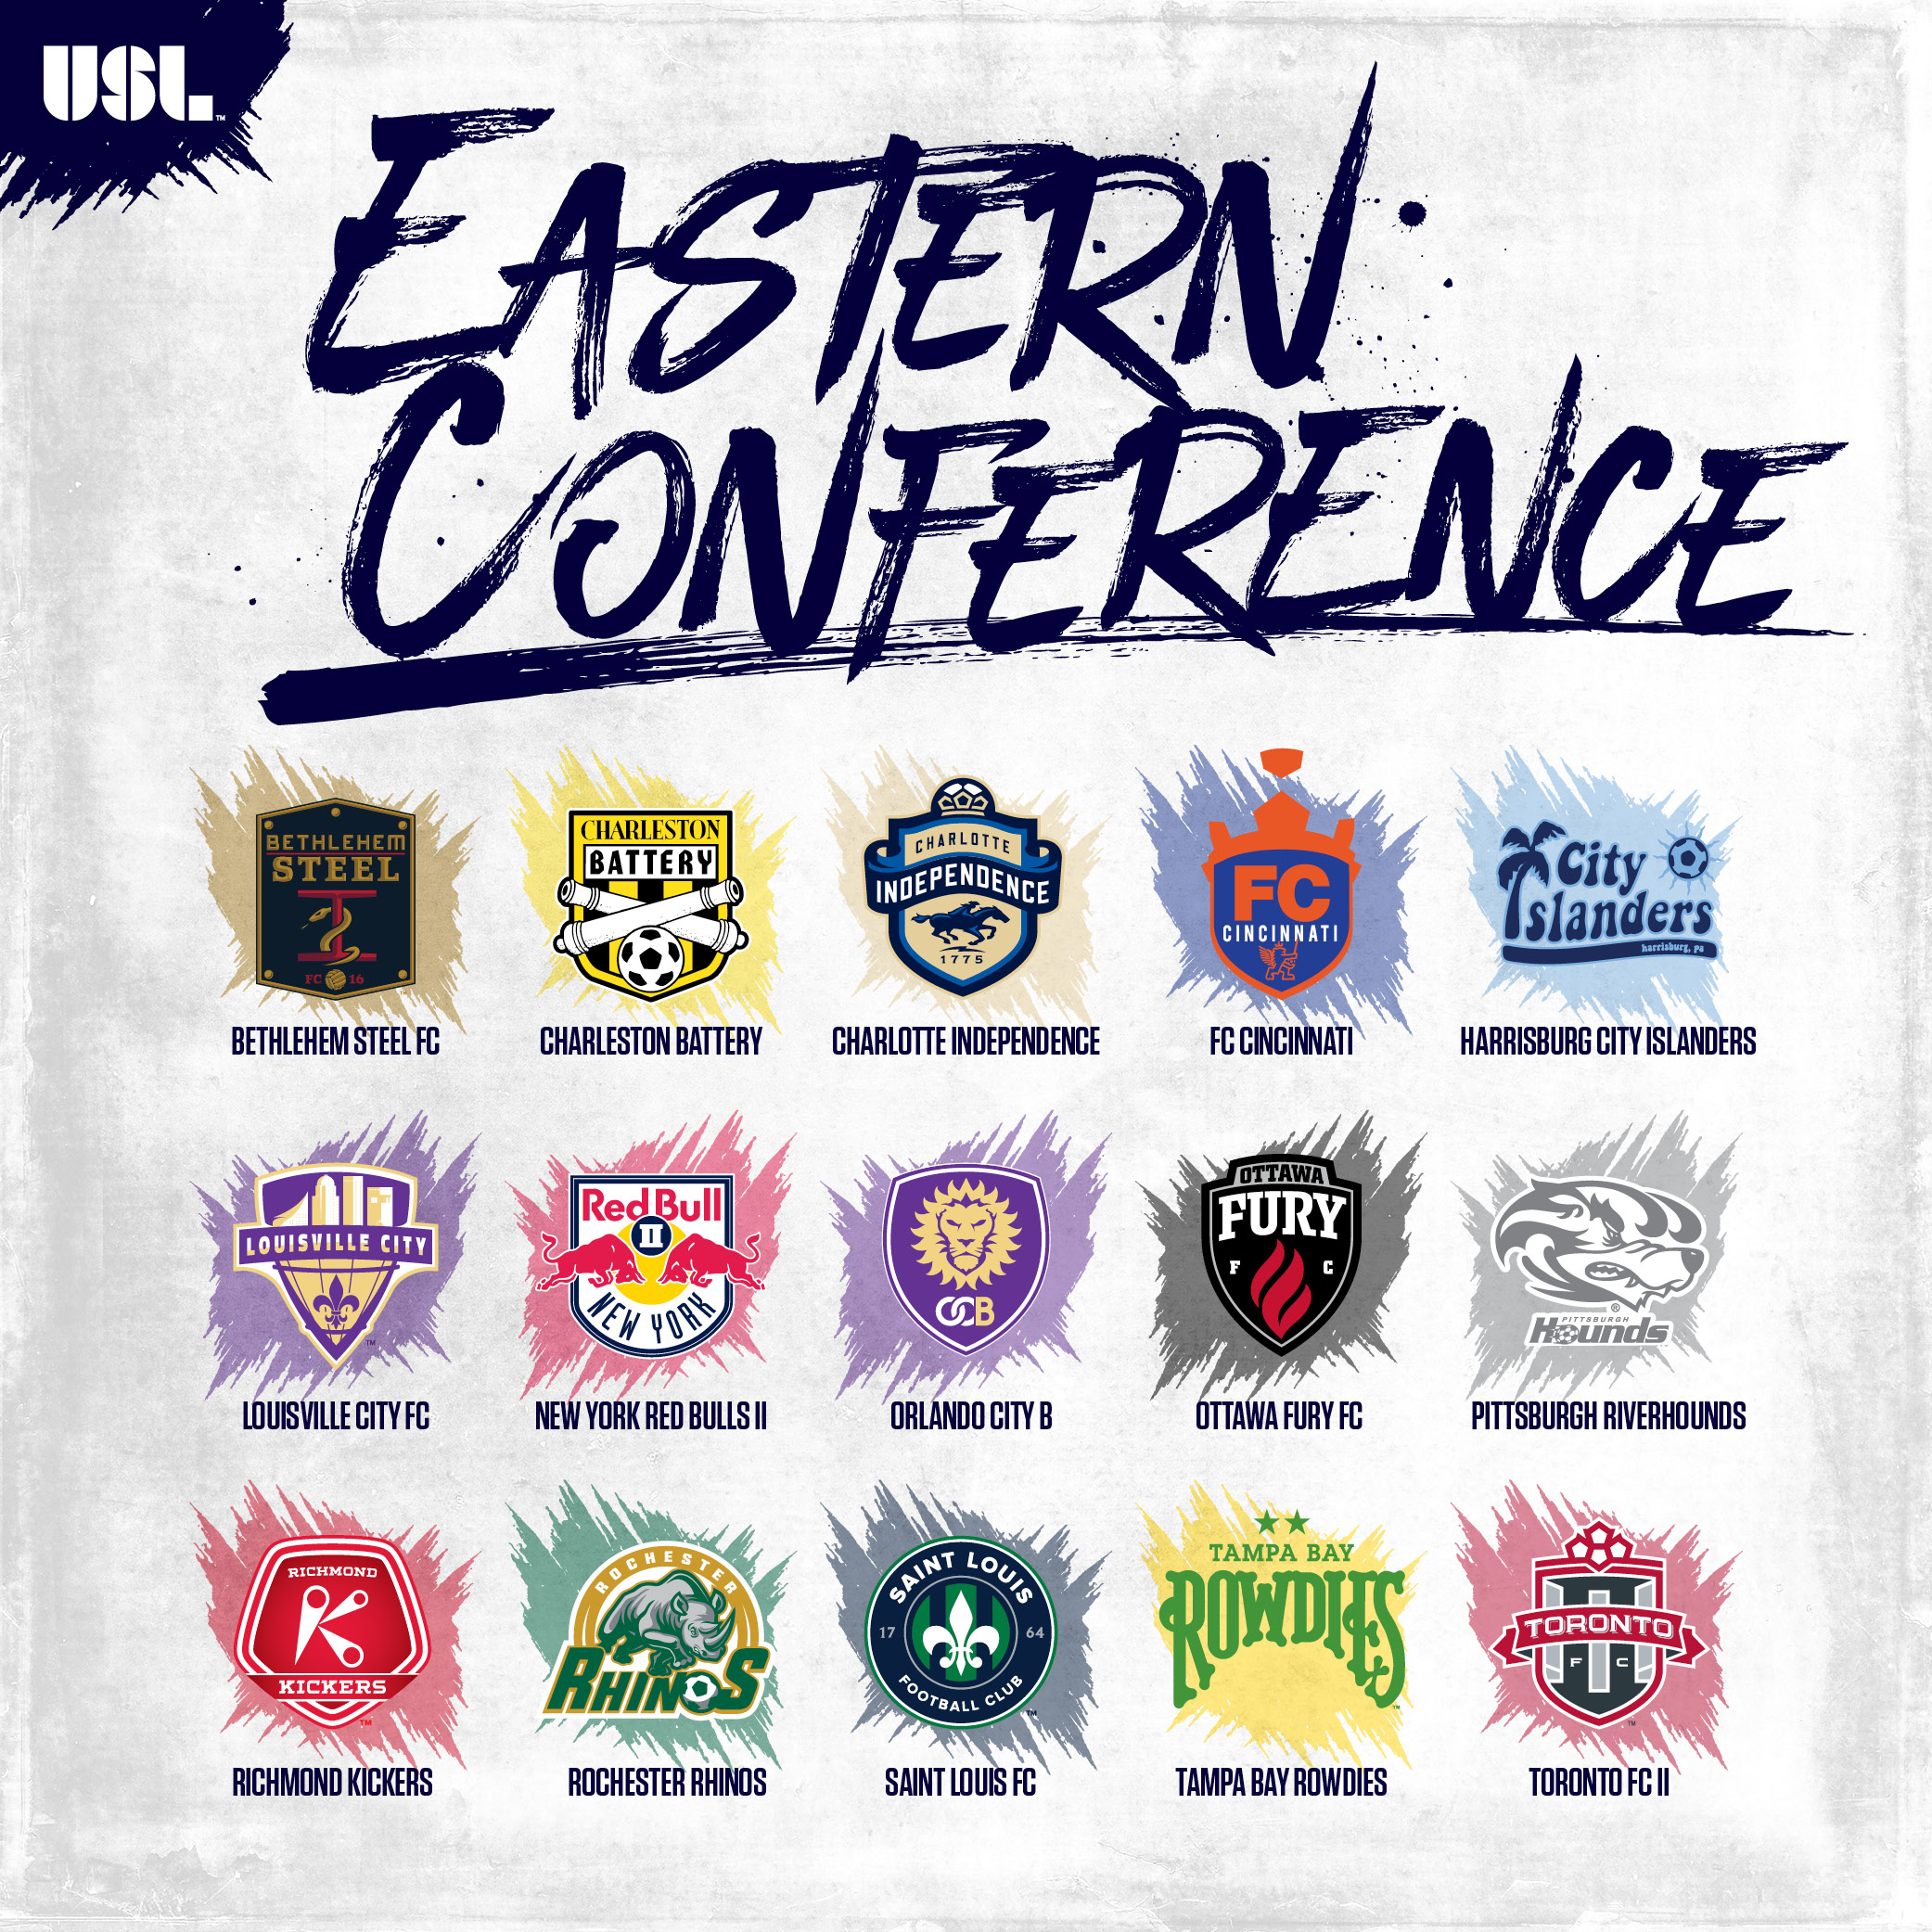 USL Announces Louisville City FC's Conference Alignment OurSports Central